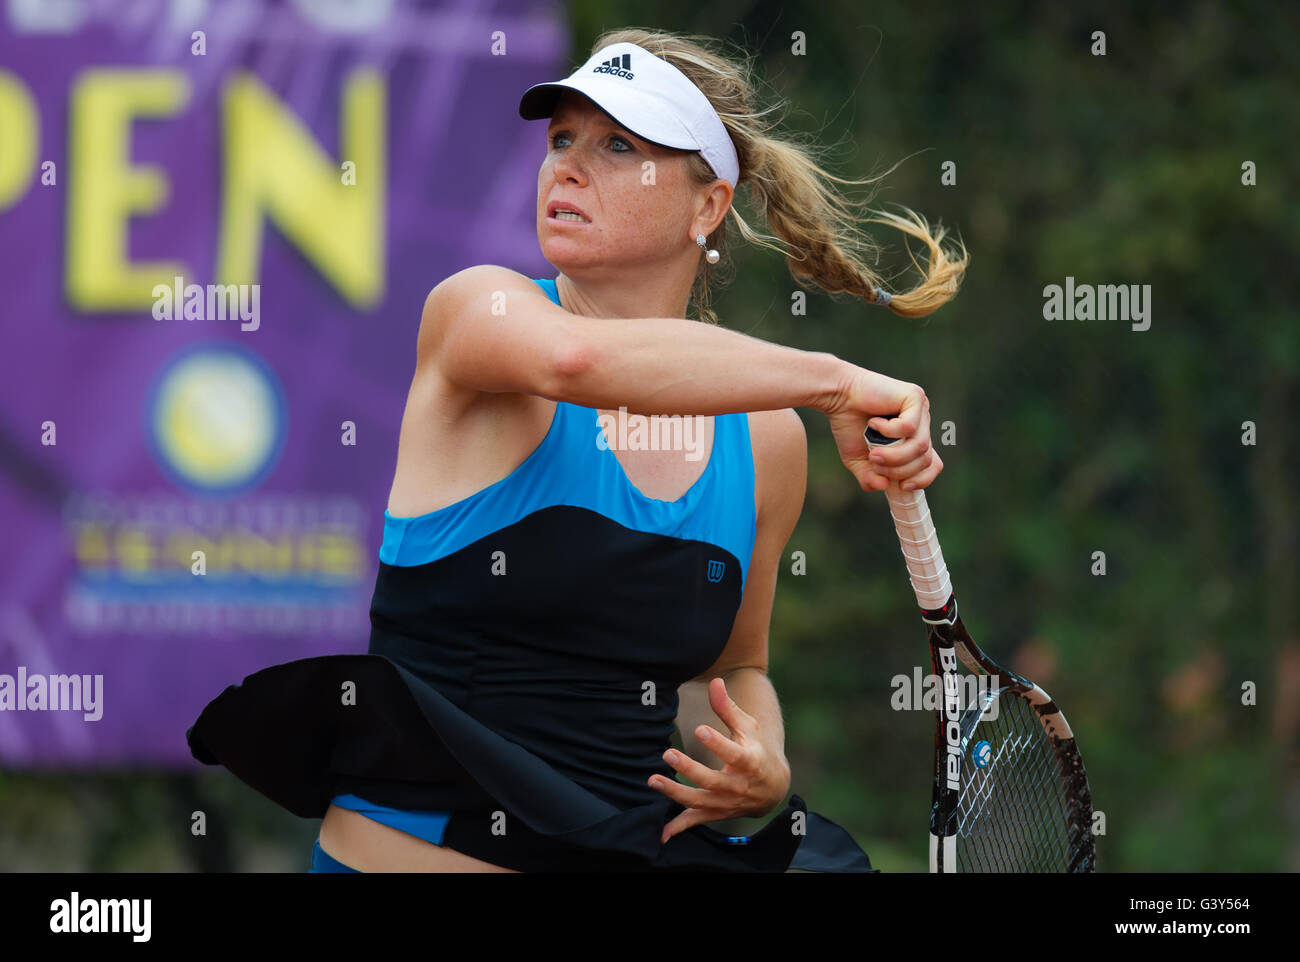 Braunschweig, Germany. 16 June, 2016. Anne Schaefer in action at the 2016  Braunschweig Womens Open ITF Pro Circuit $25,000 tennis tournament. Credit:  Jimmie48 Photography/Alamy Live News Stock Photo - Alamy